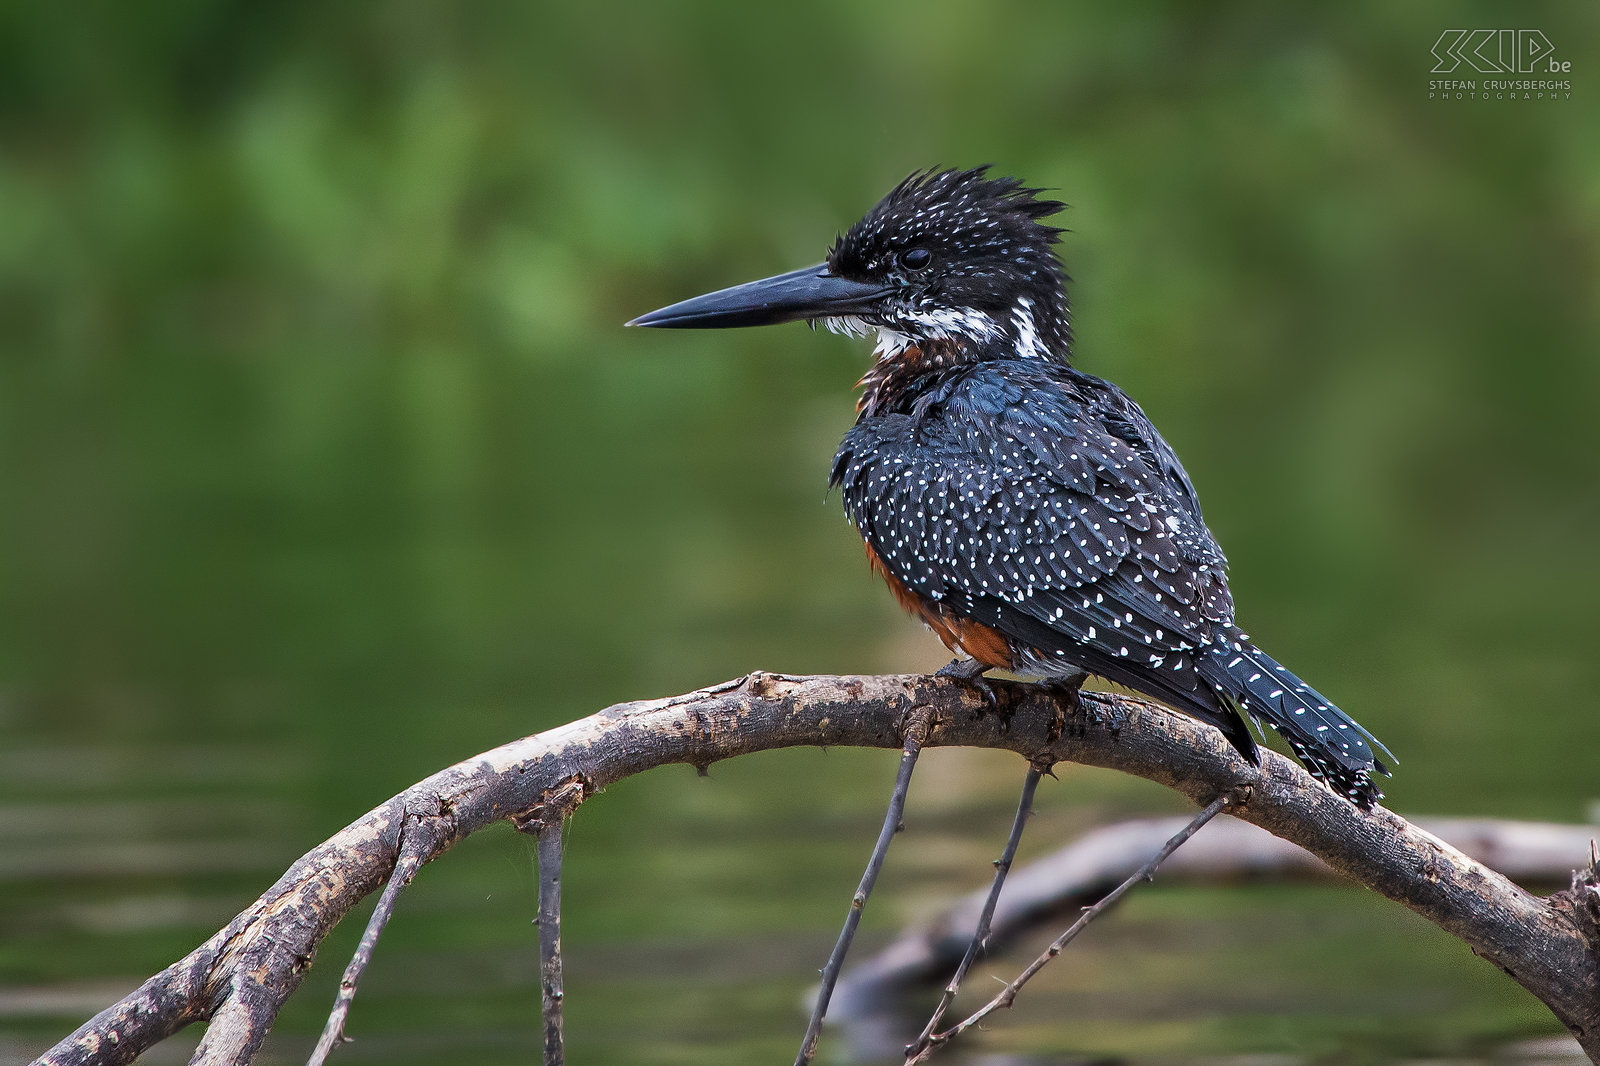 Lake Naivasha - Giant kingfisher The giant kingfisher (Megaceryle maxima) is the largest kingfisher in Africa.<br />
<br />
Afterwards we left to the airport in Nairobi. Stefan Cruysberghs